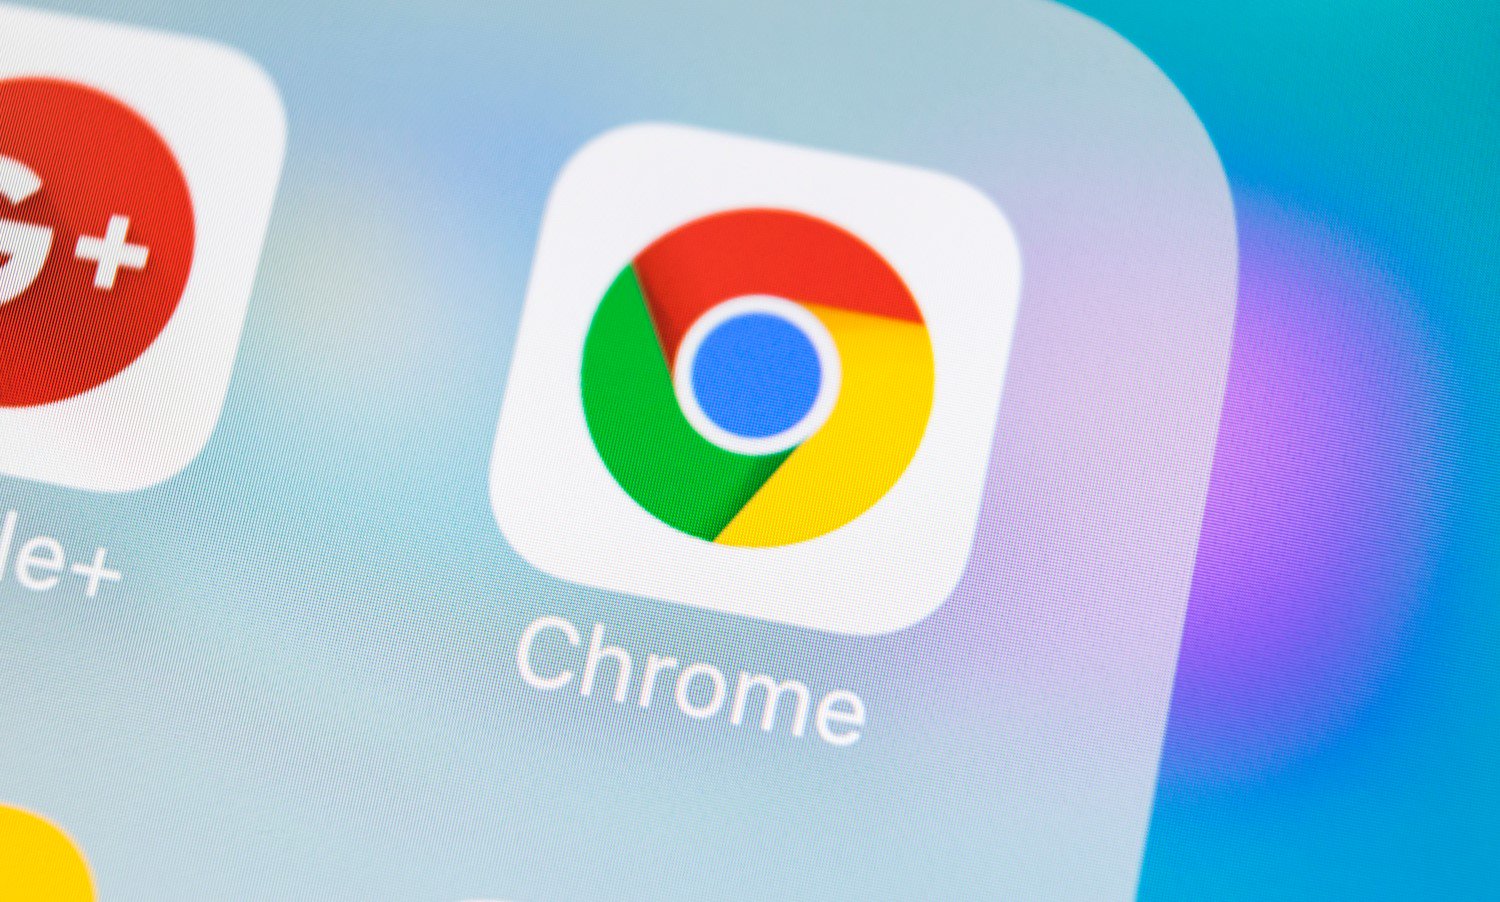 Google Moves To Protect Chrome Users From Cryptojacking And Hacks